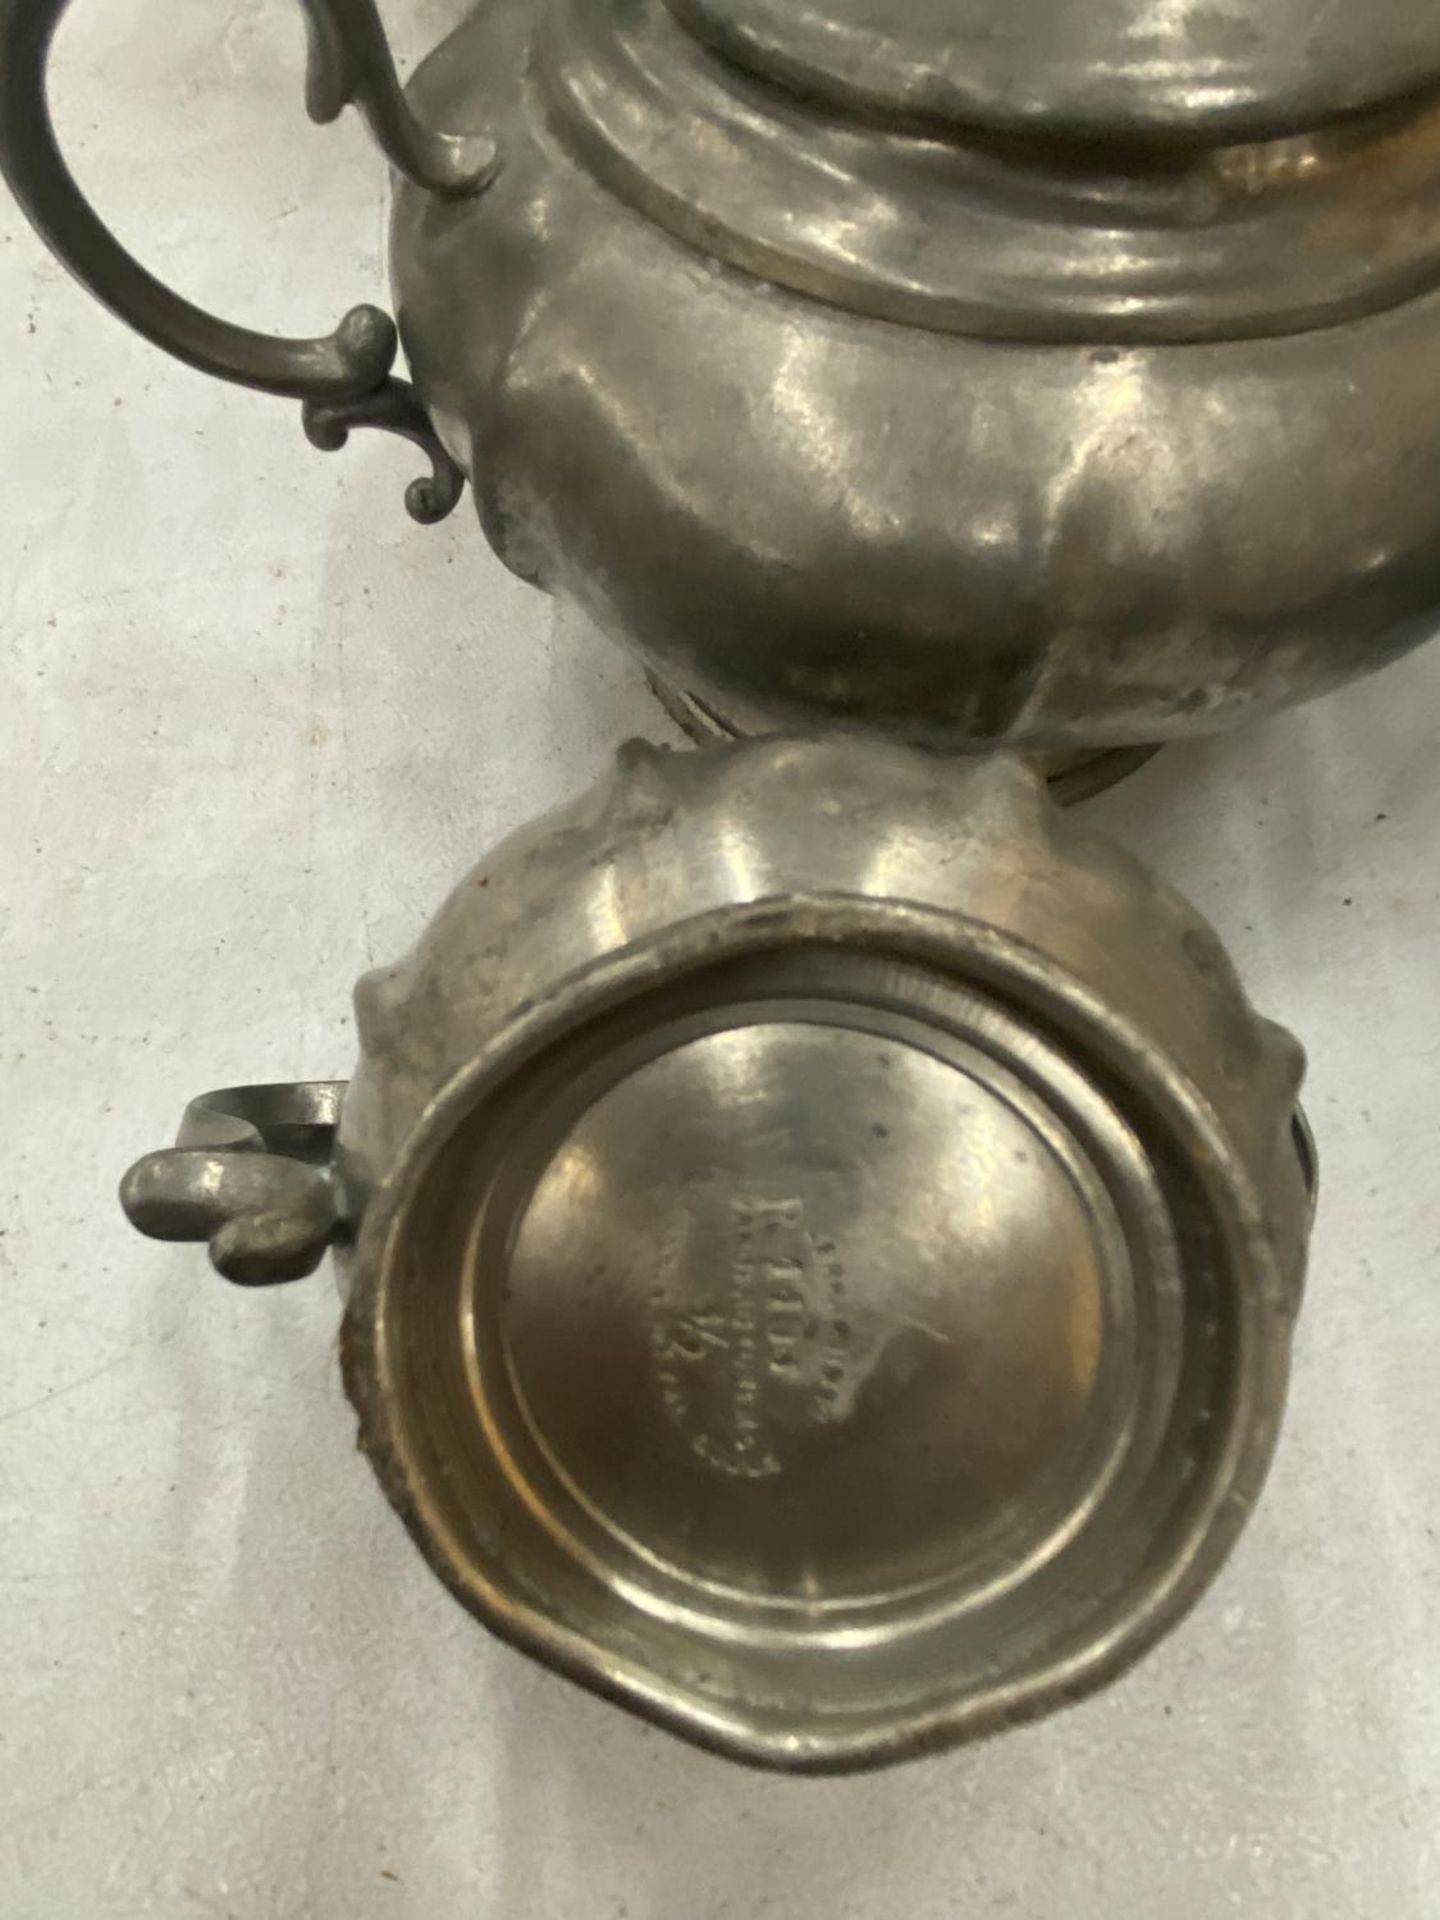 A PEWTER TEASET TO INCLUDE TEAPOT, SUGAR, MILK AND HOT WATER JUG - Image 6 of 6